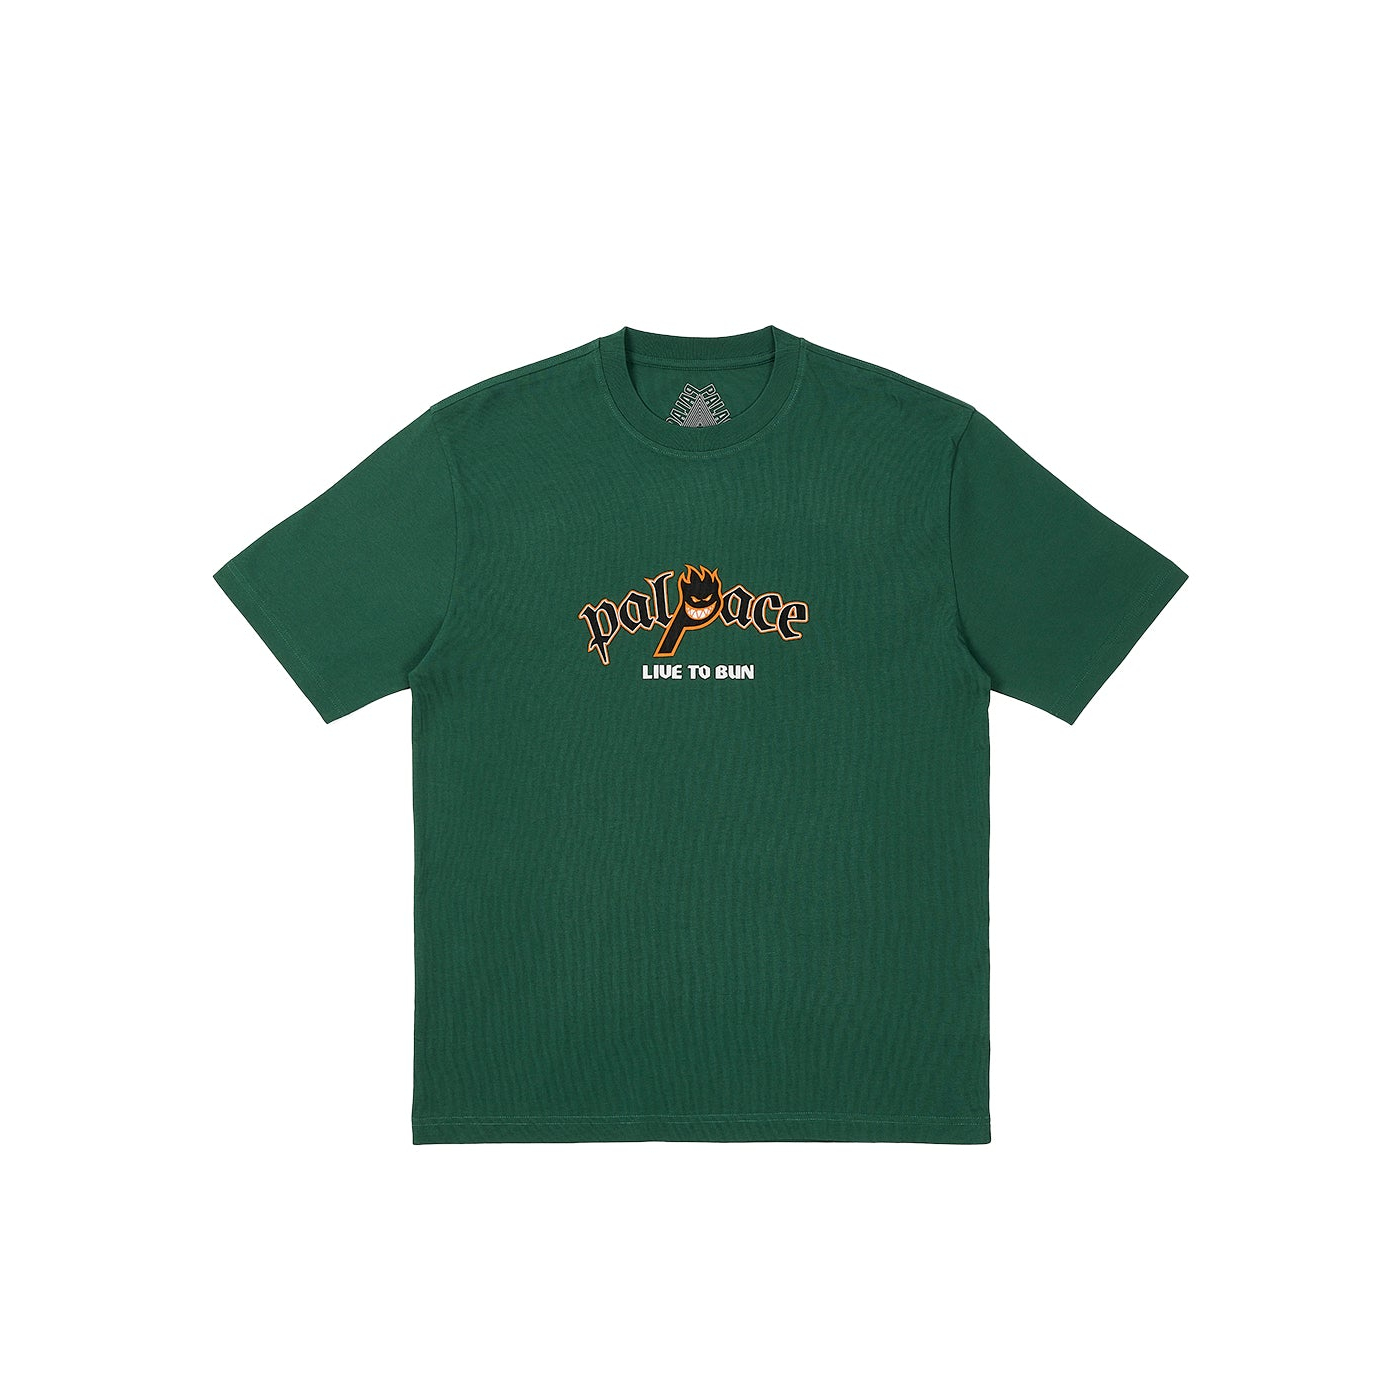 Sサイズ PALACE SPITFIRE POLO GREEN ポロシャツ - ポロシャツ